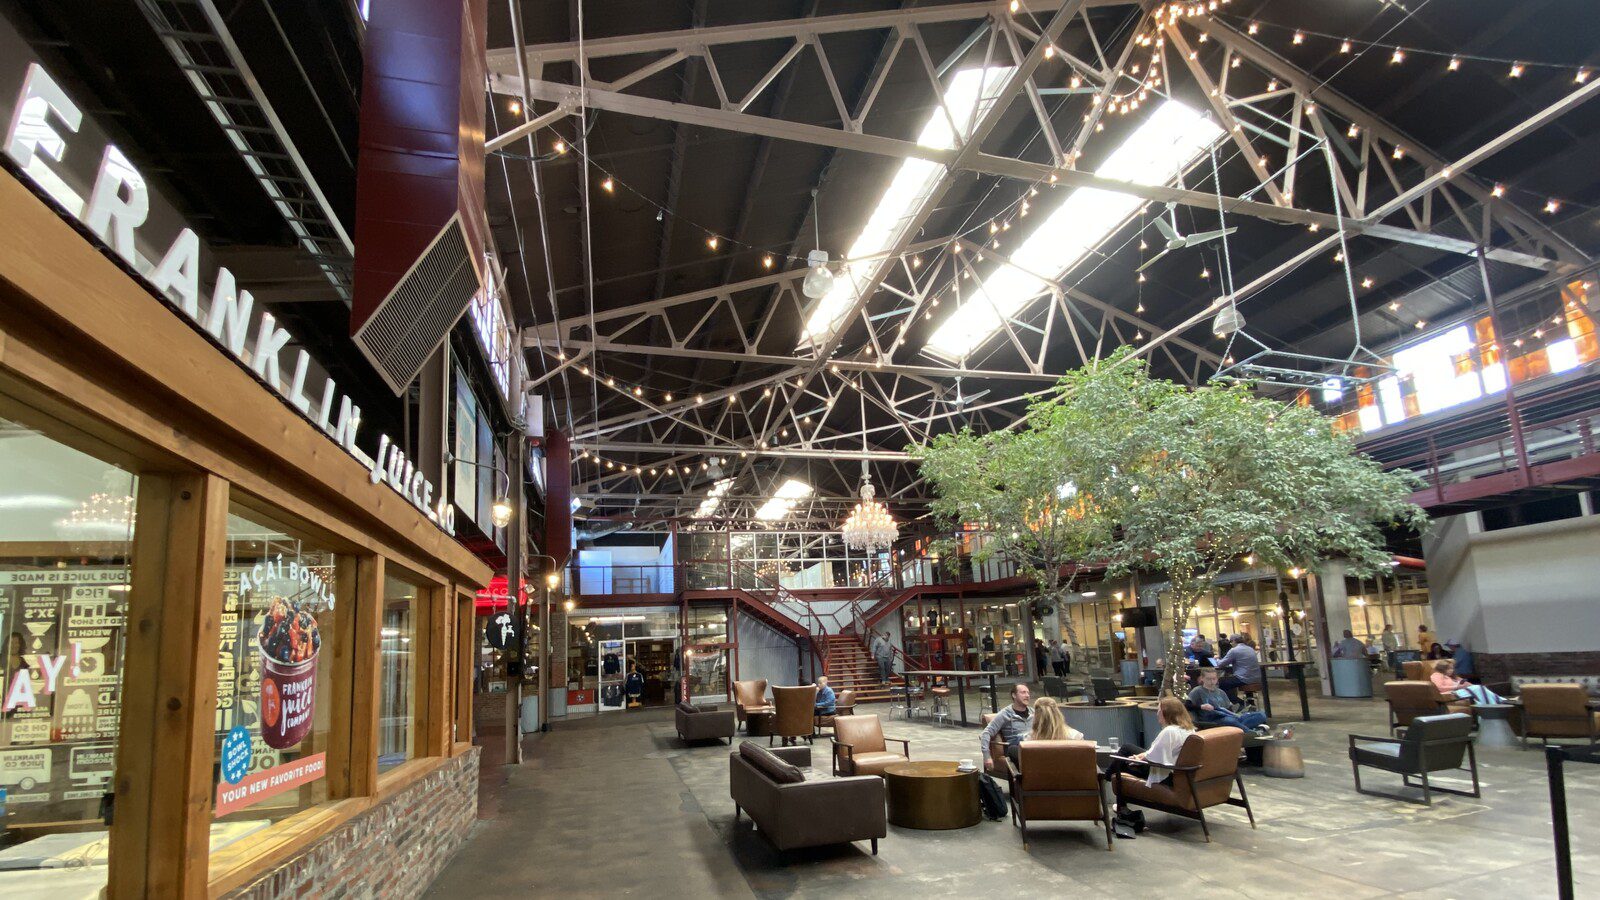 Interior gathering area, Factory at Franklin is a historic property and a top destination for shopping artisan goods, trying culinary delights, and watching great live entertainment.